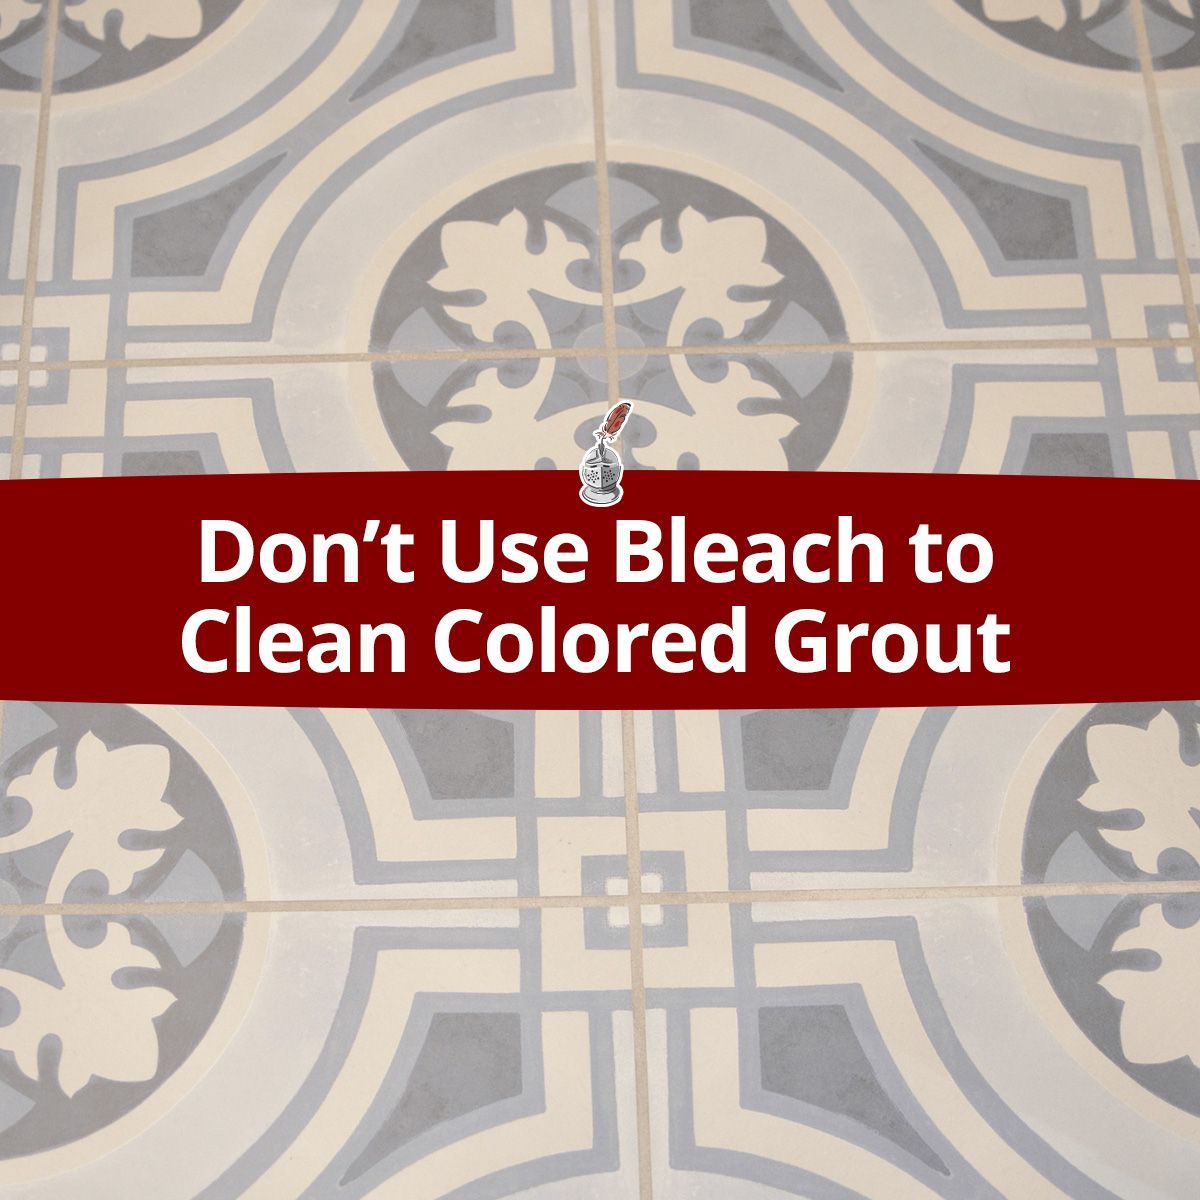 Don't Use Bleach to Clean Colored Grout